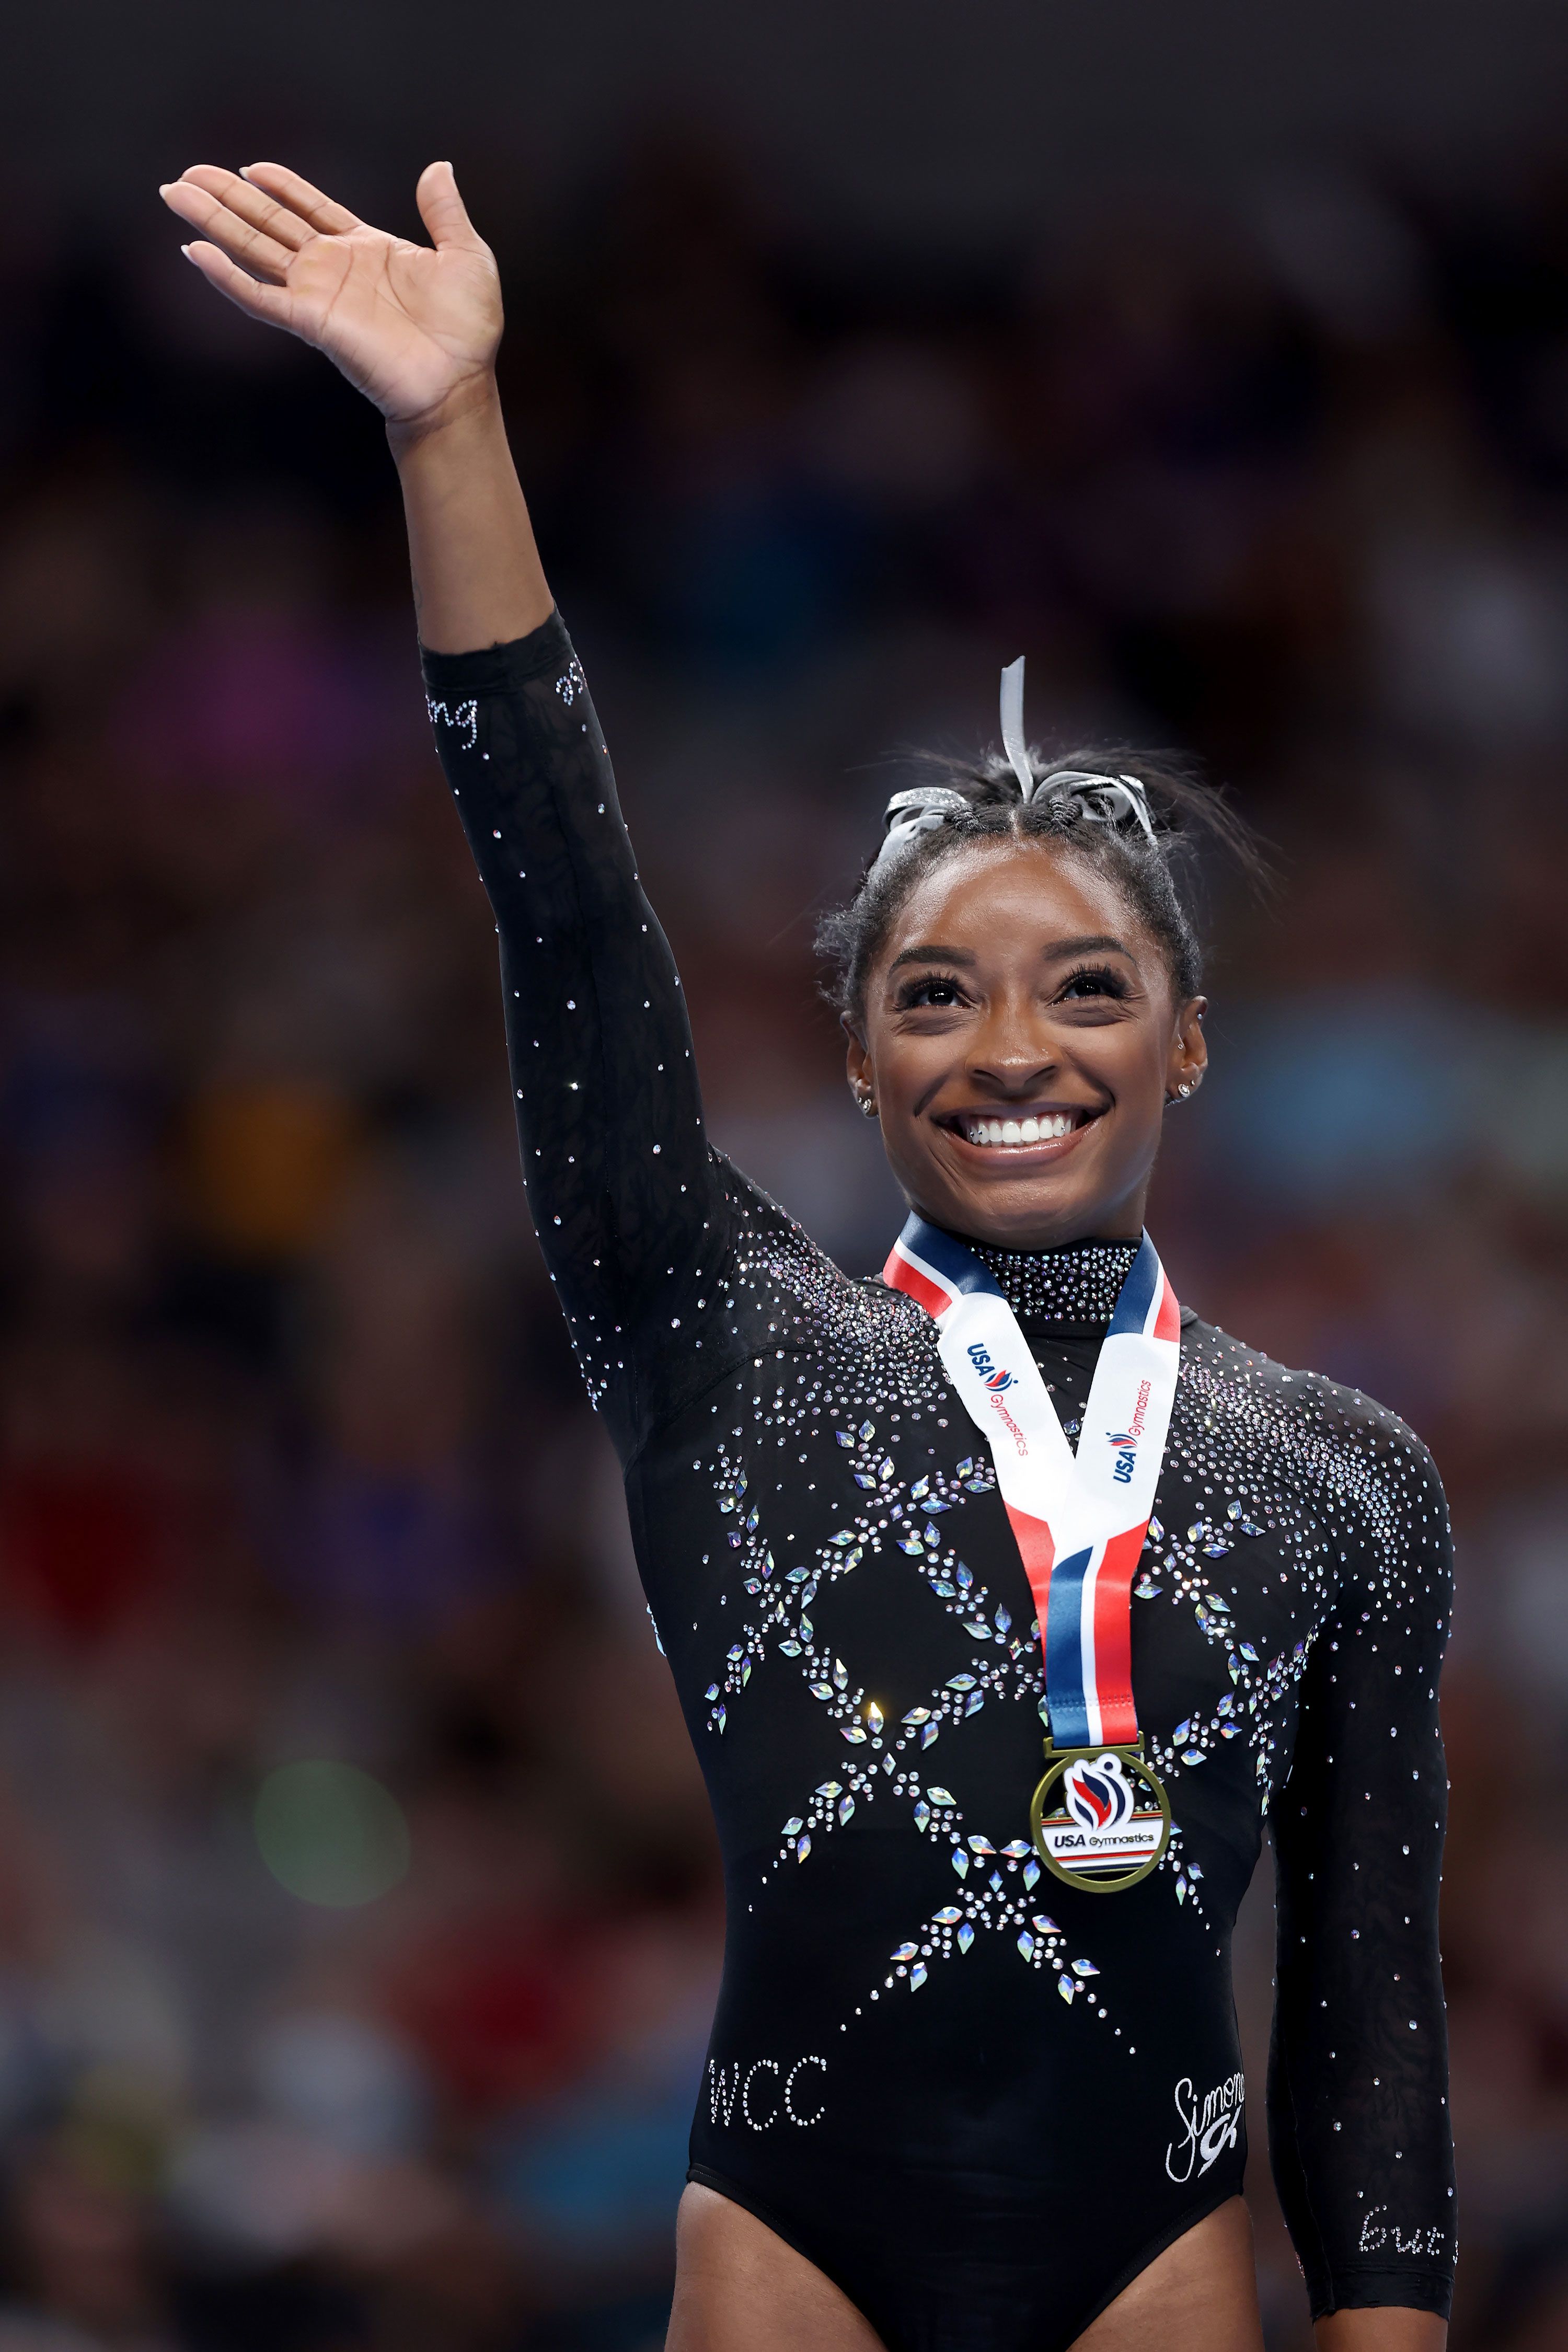 Simone Biles Is the Best Gymnast in the World